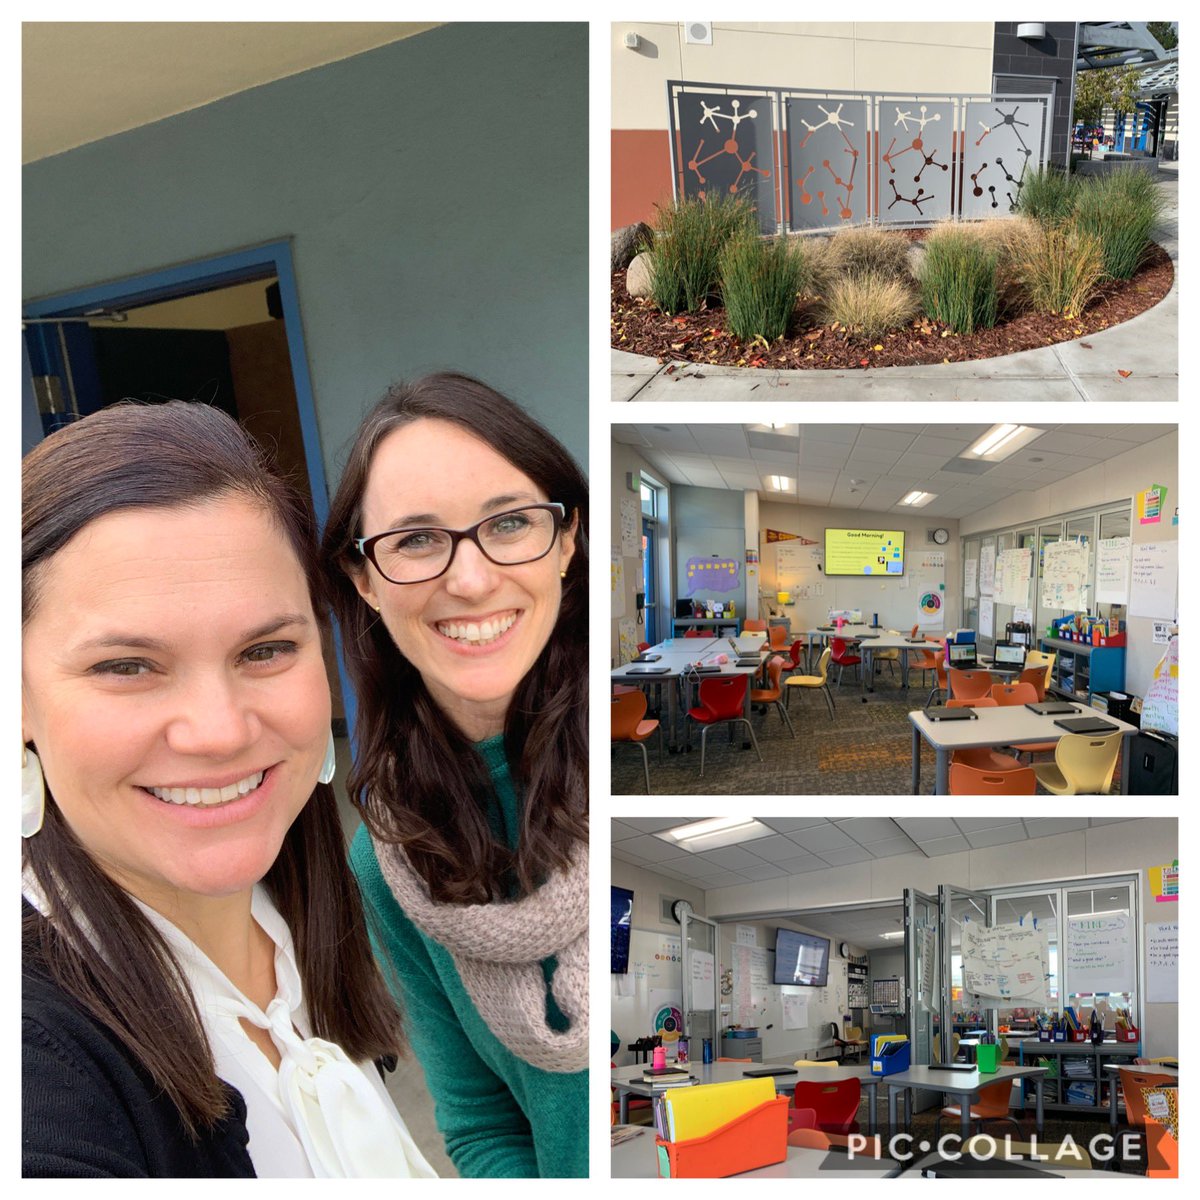 Thank you @TechCoachSusan for connecting me with @MsHaughs!! The Campbell School of Innovation is truly preparing learners for their futures. #studentchoice #forwardthinking #designlearning #innovativespaces